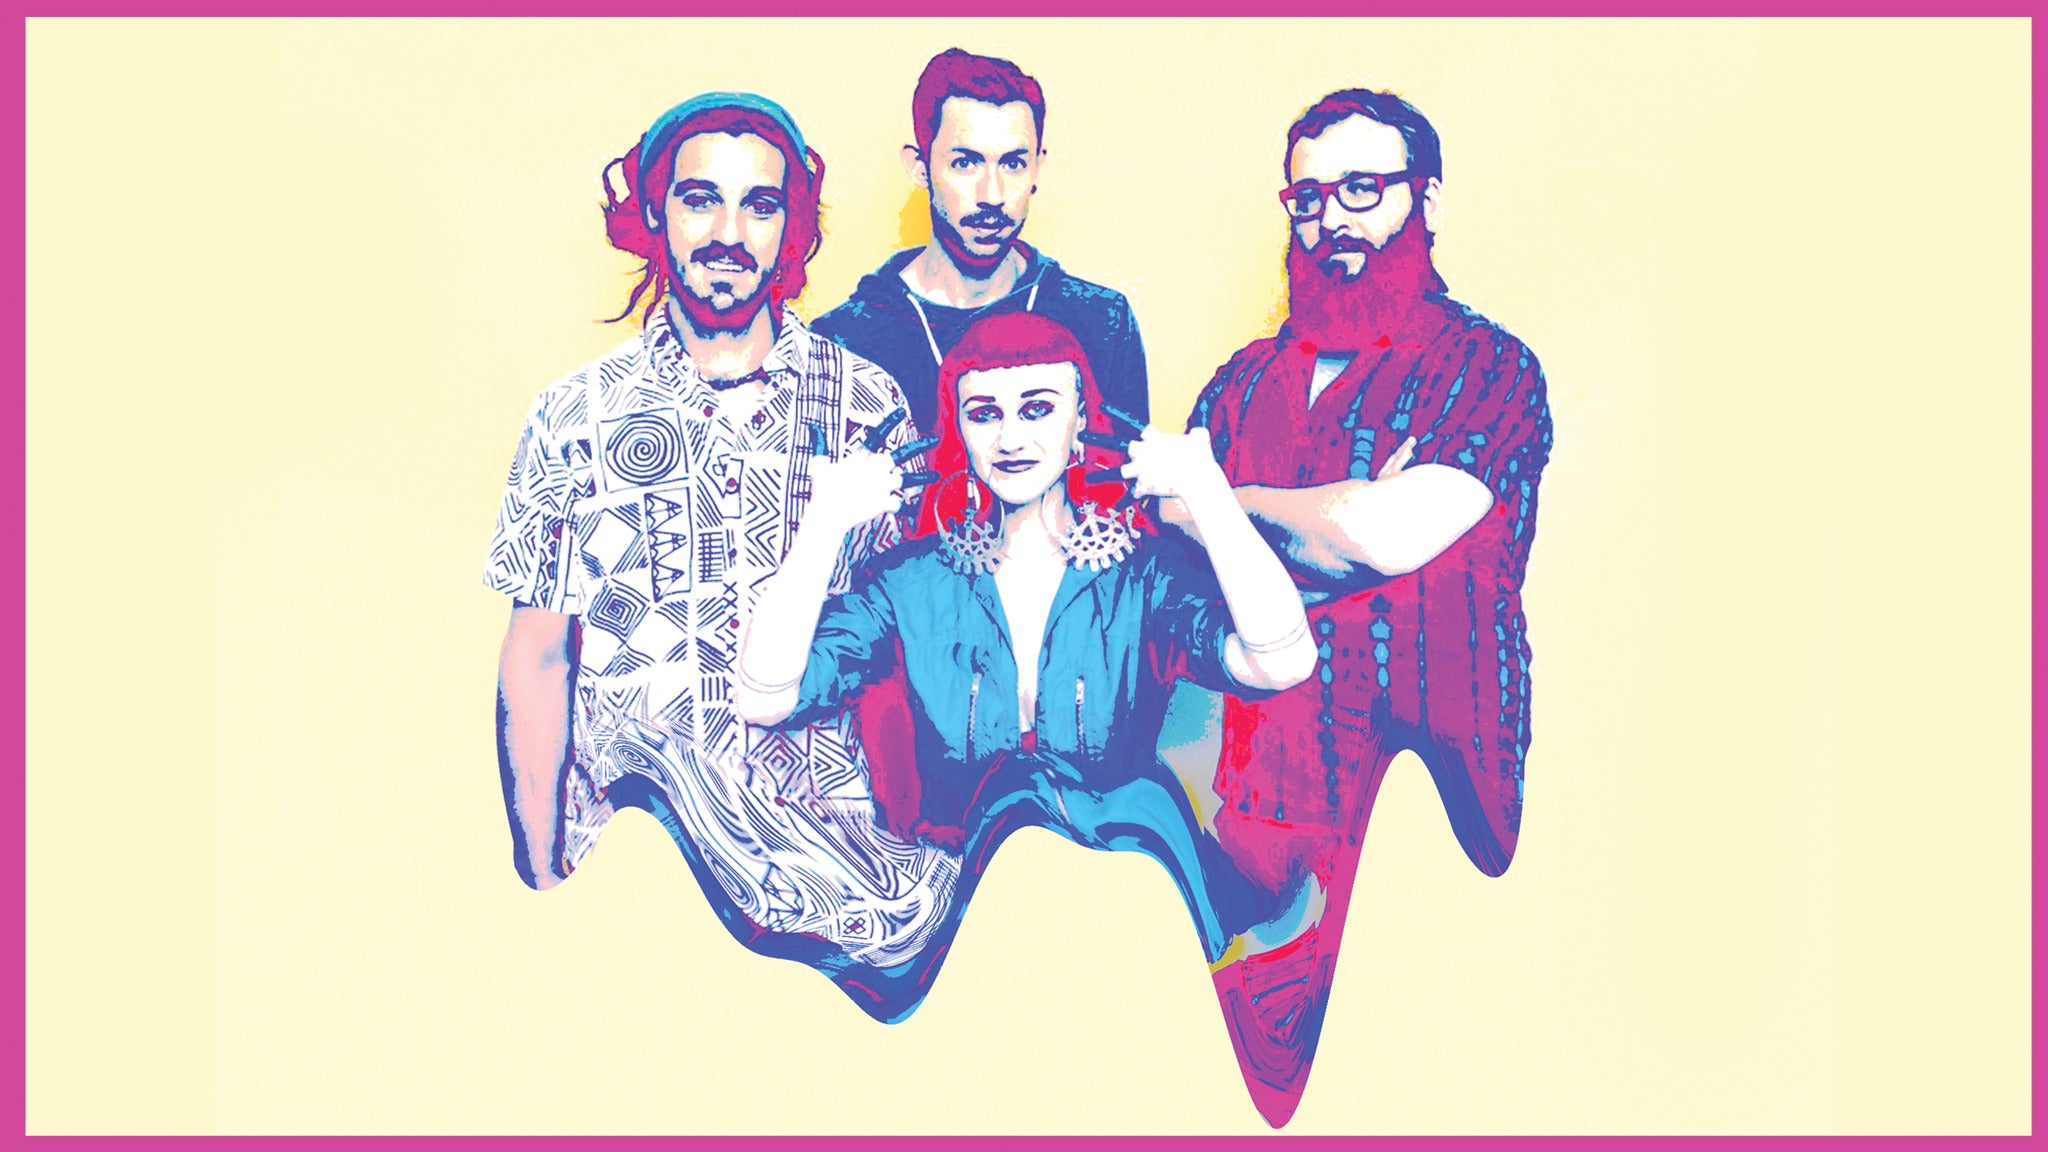 Image used with permission from Ticketmaster | Hiatus Kaiyote tickets